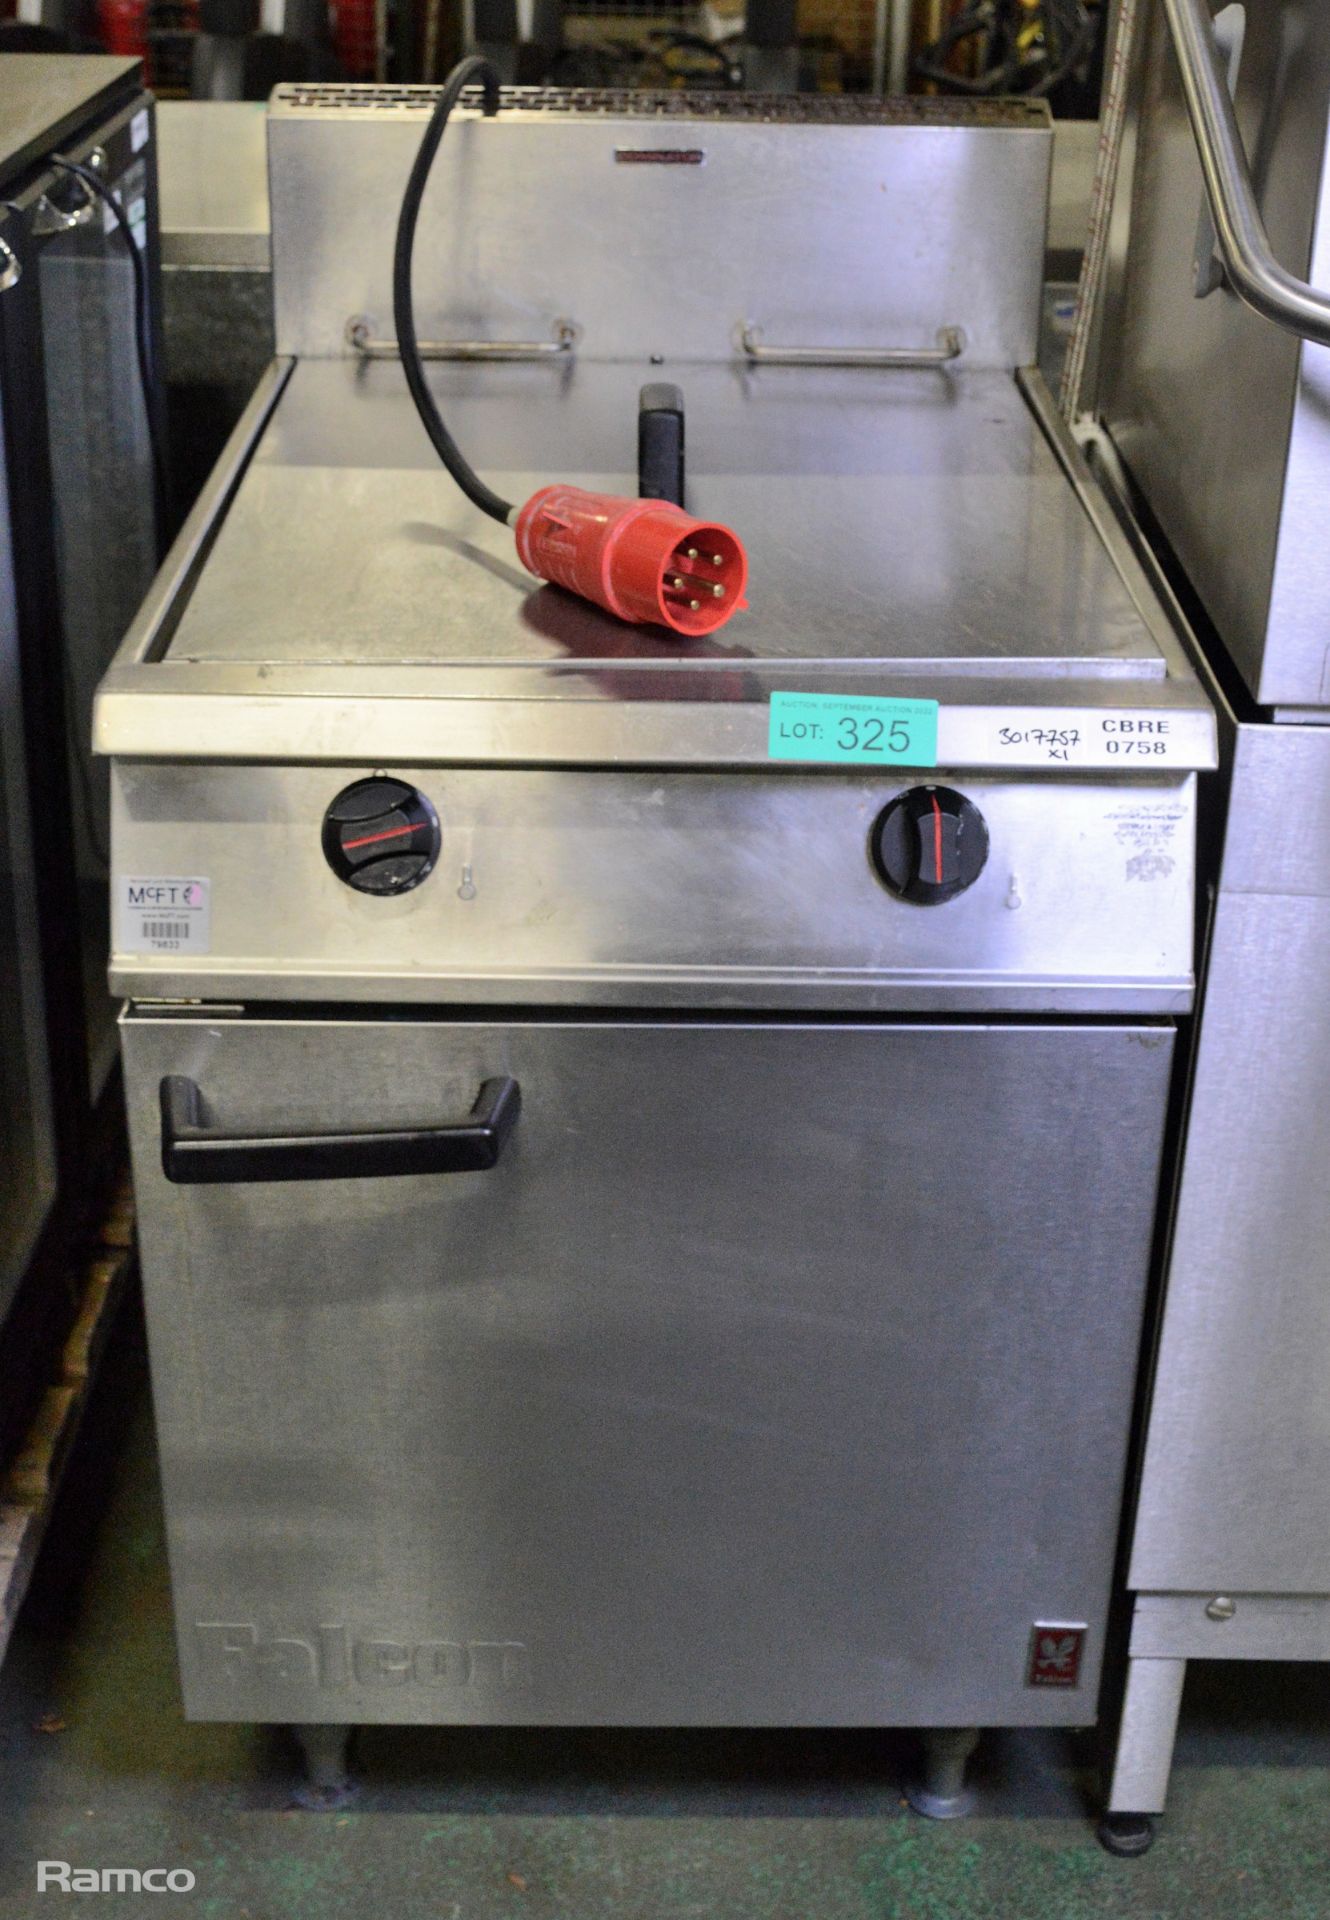 Falcon Dominator individually controlled twin tank gas fryer